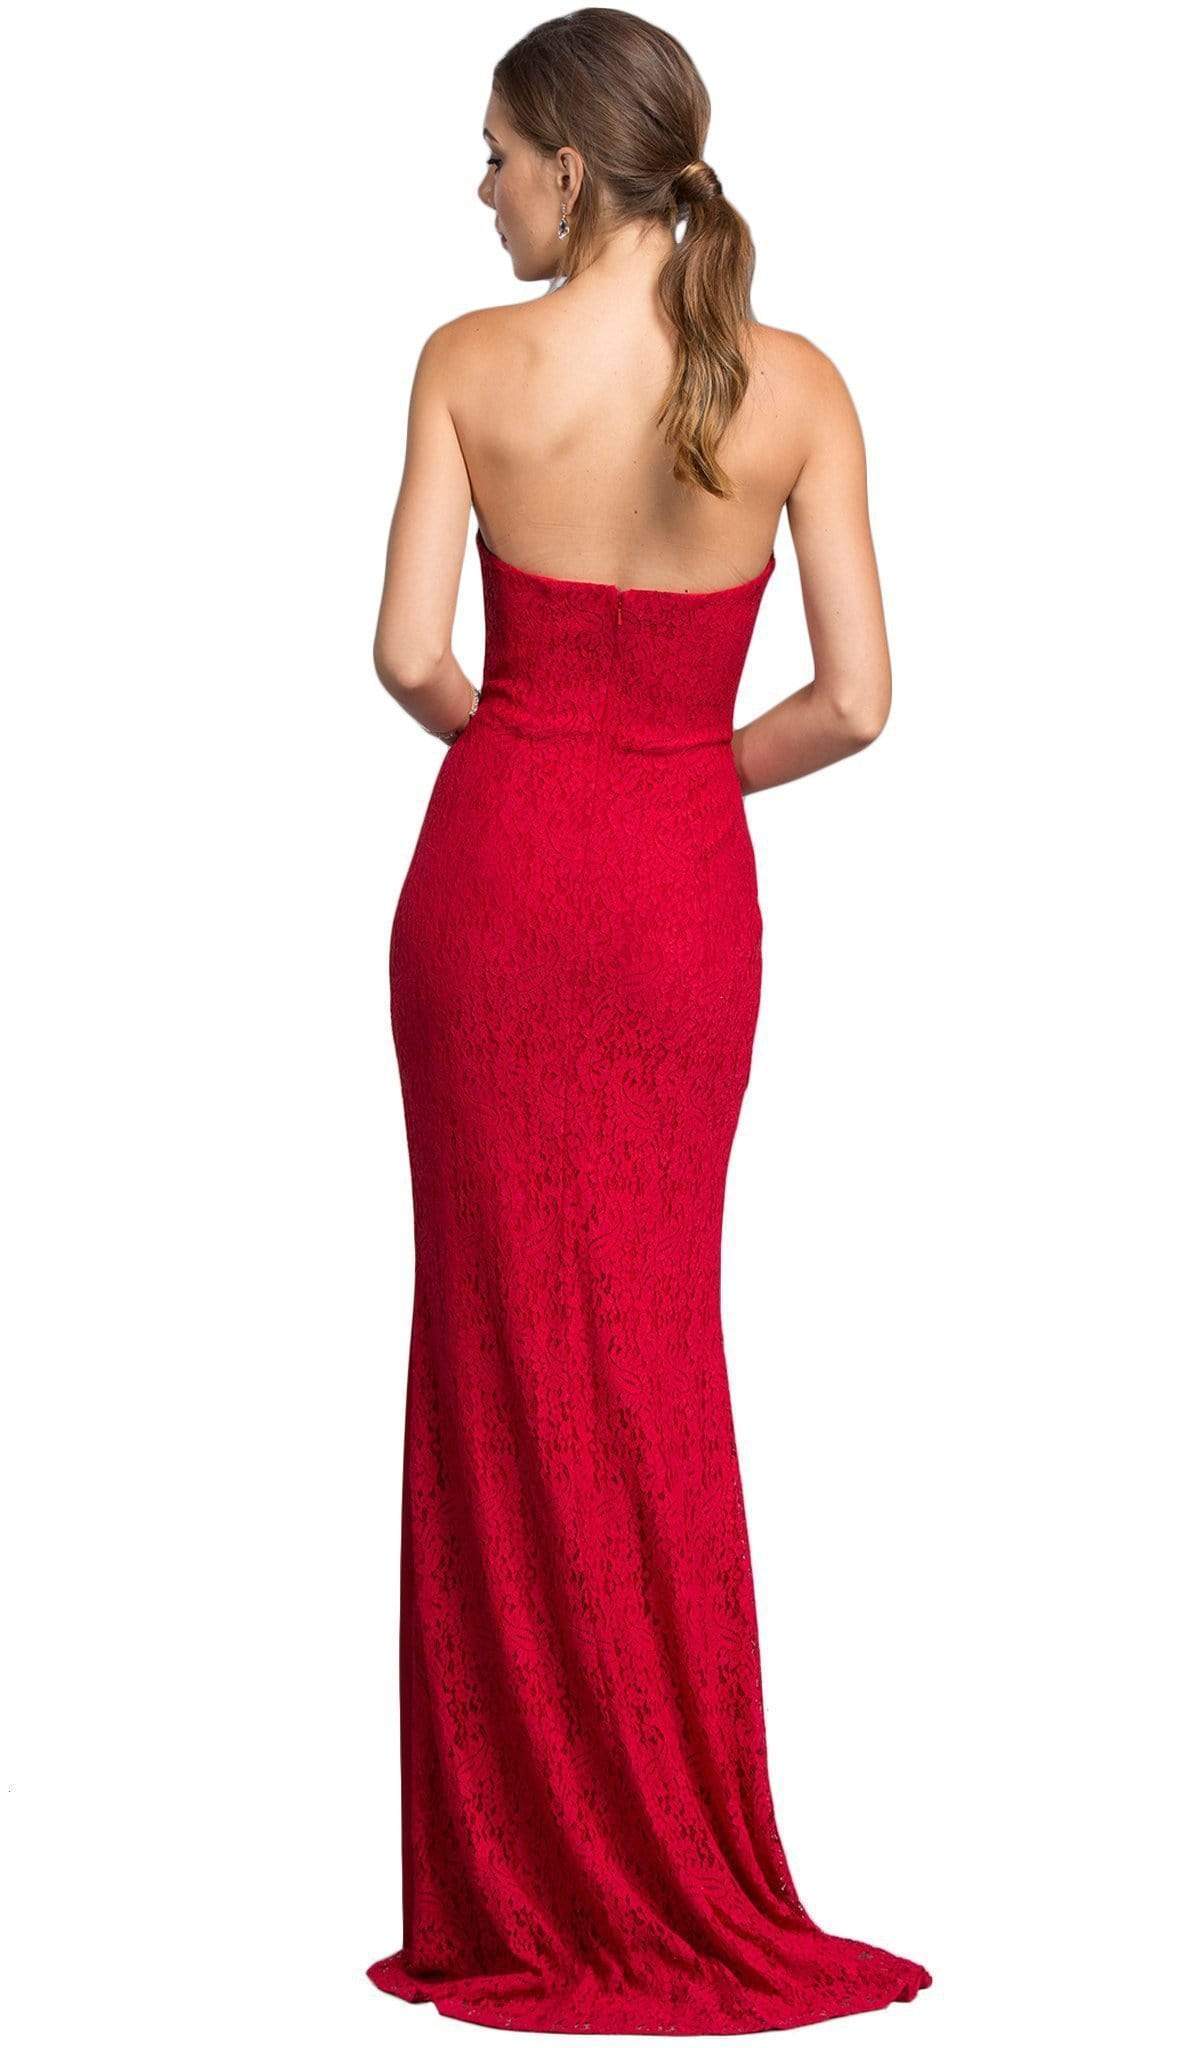 Lace Strapless Sweetheart Prom Dress Dress